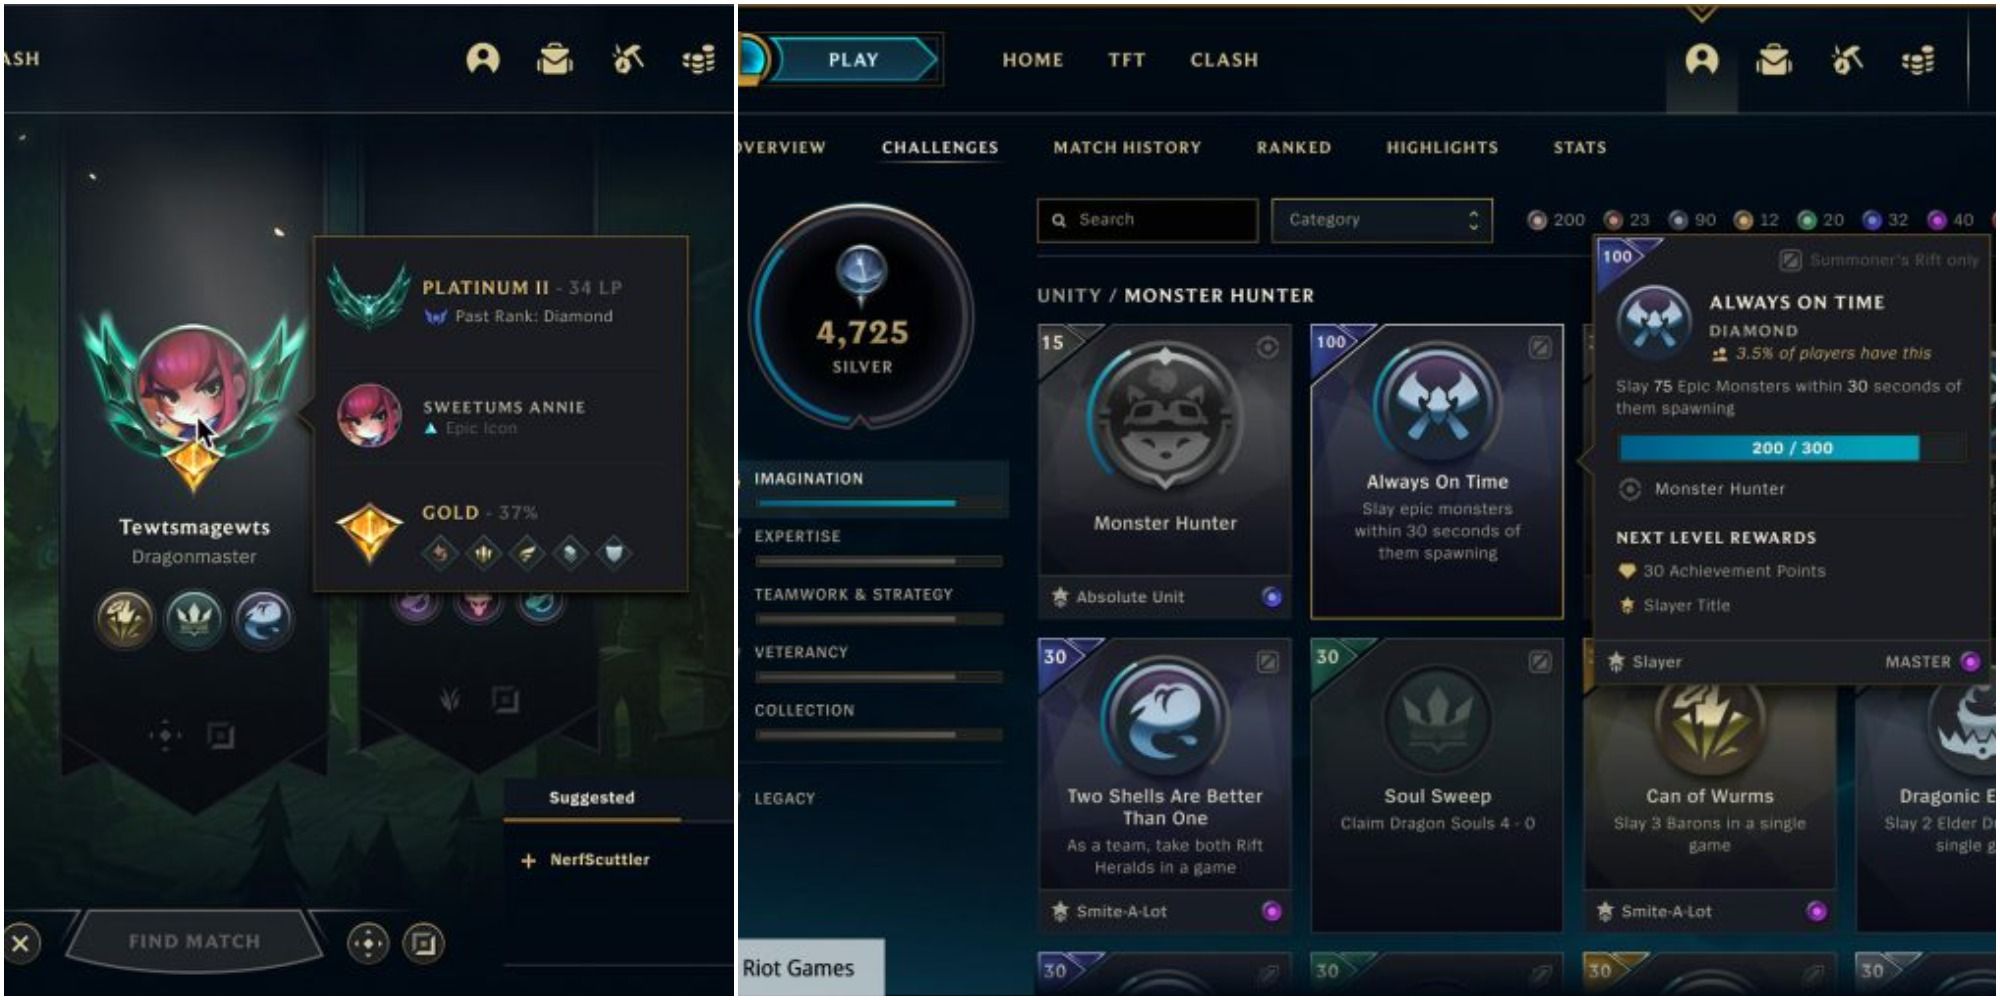 Introducing Challenges: Tracking your LoL progress aside from rank